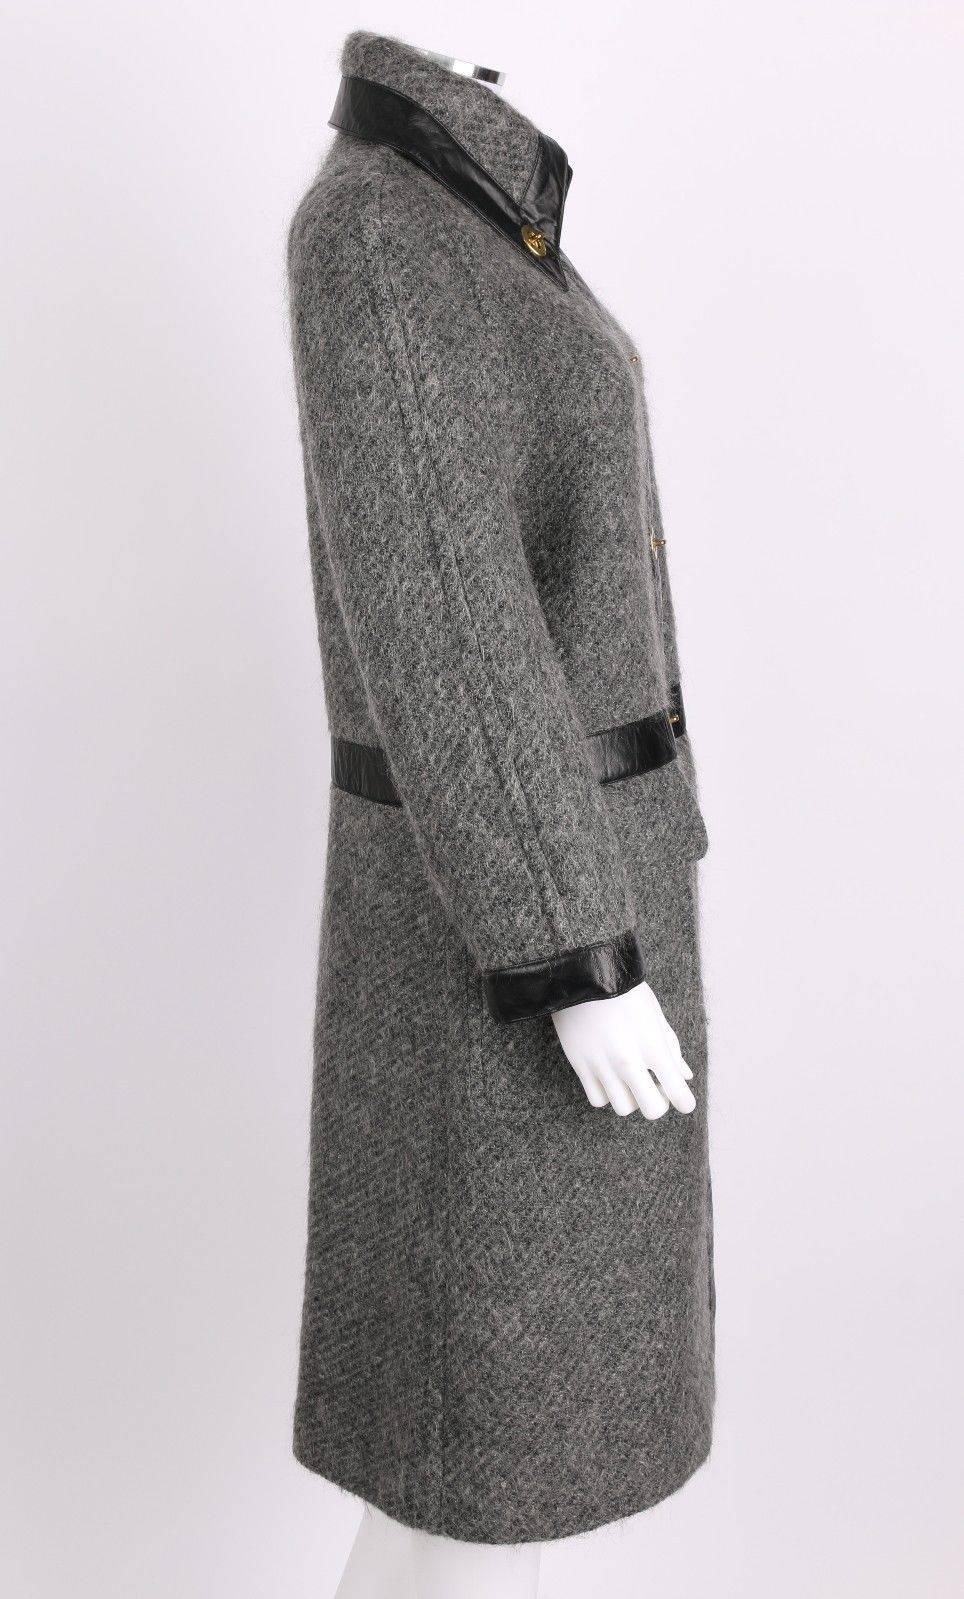 Vintage c.1960s Bonnie Cashin for Sills gray wool-mohair coat. Black leather trim on collar, waist, closure, and cuffs.. Two large patch pockets. Front center closure with coach-style turn-lock. Turn-lock on collar. Midi Length. Unmarked Fabric: